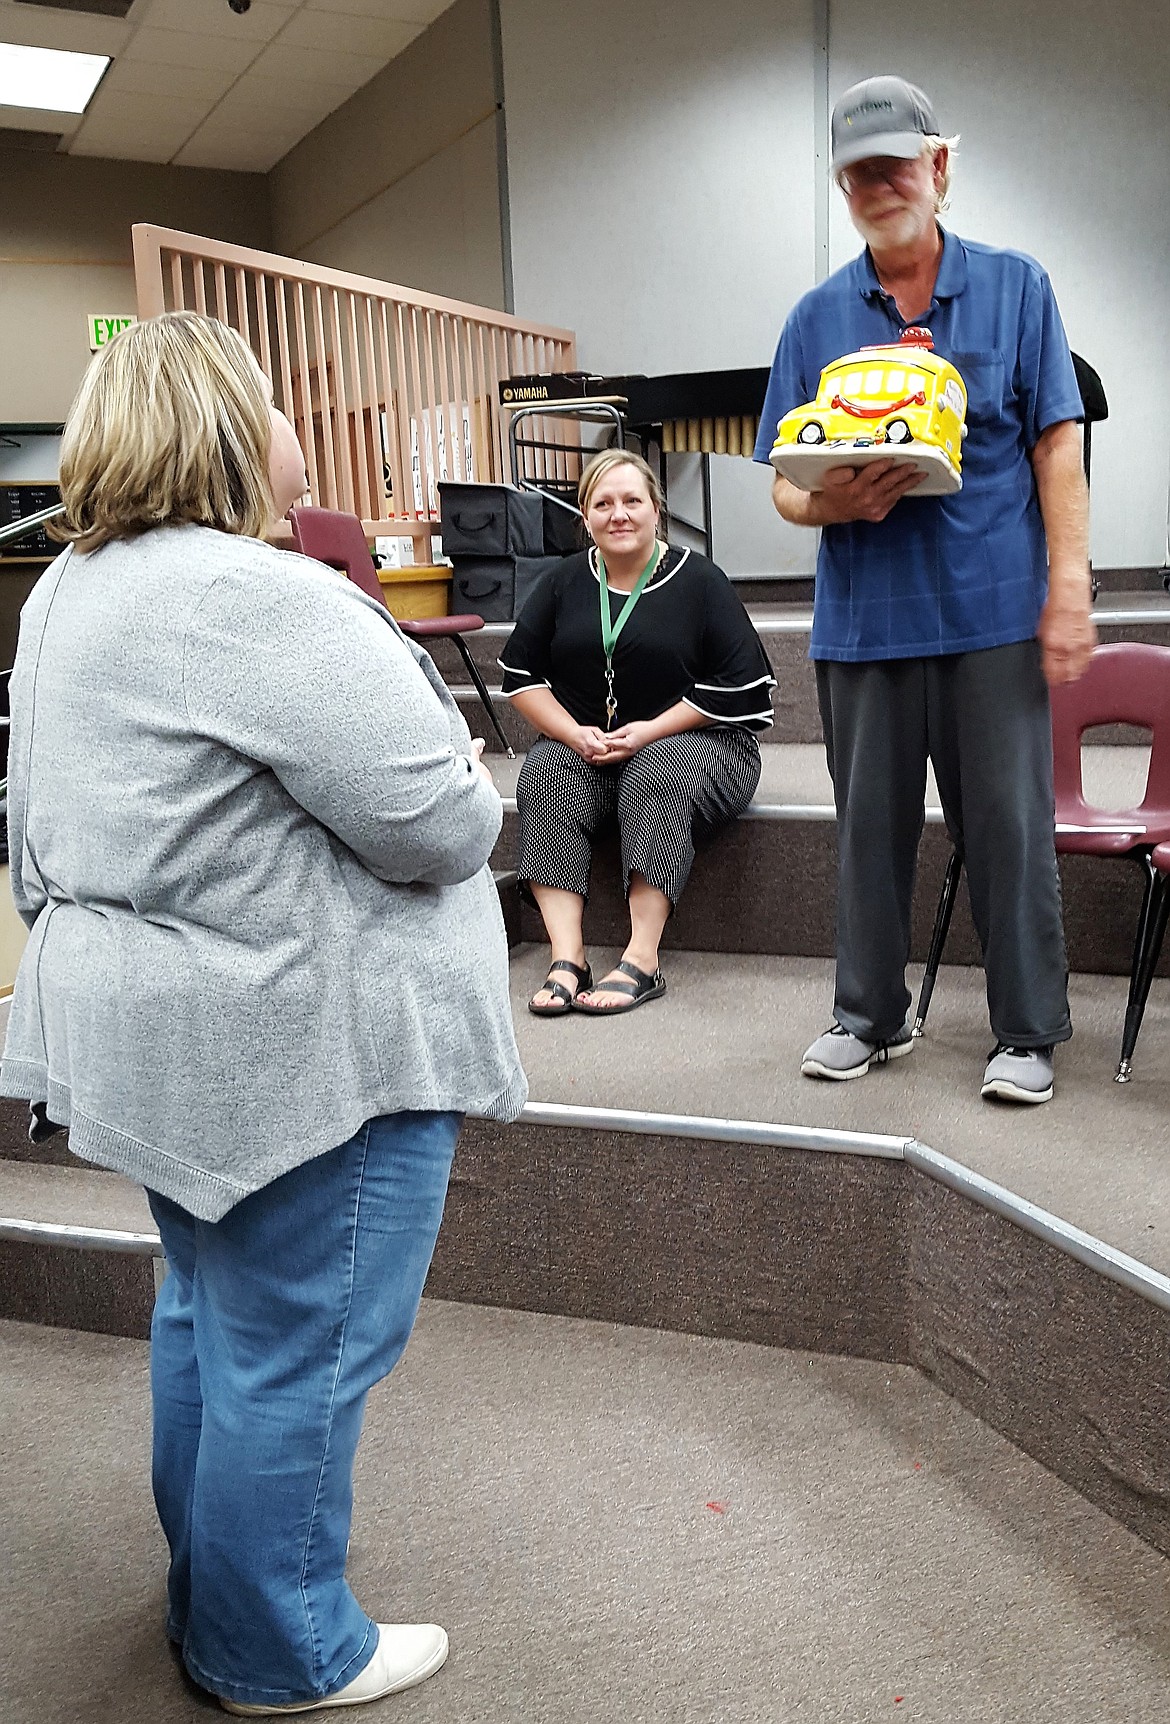 St. Regis School Board Chair Charlee Thompson (left) presents Bernie Patterson with a bus cookie jar as a retirement gift during his party earlier this month. Staff members have promised to refill it monthly with his favorite cookies. (Photo provided by St. Regis School)